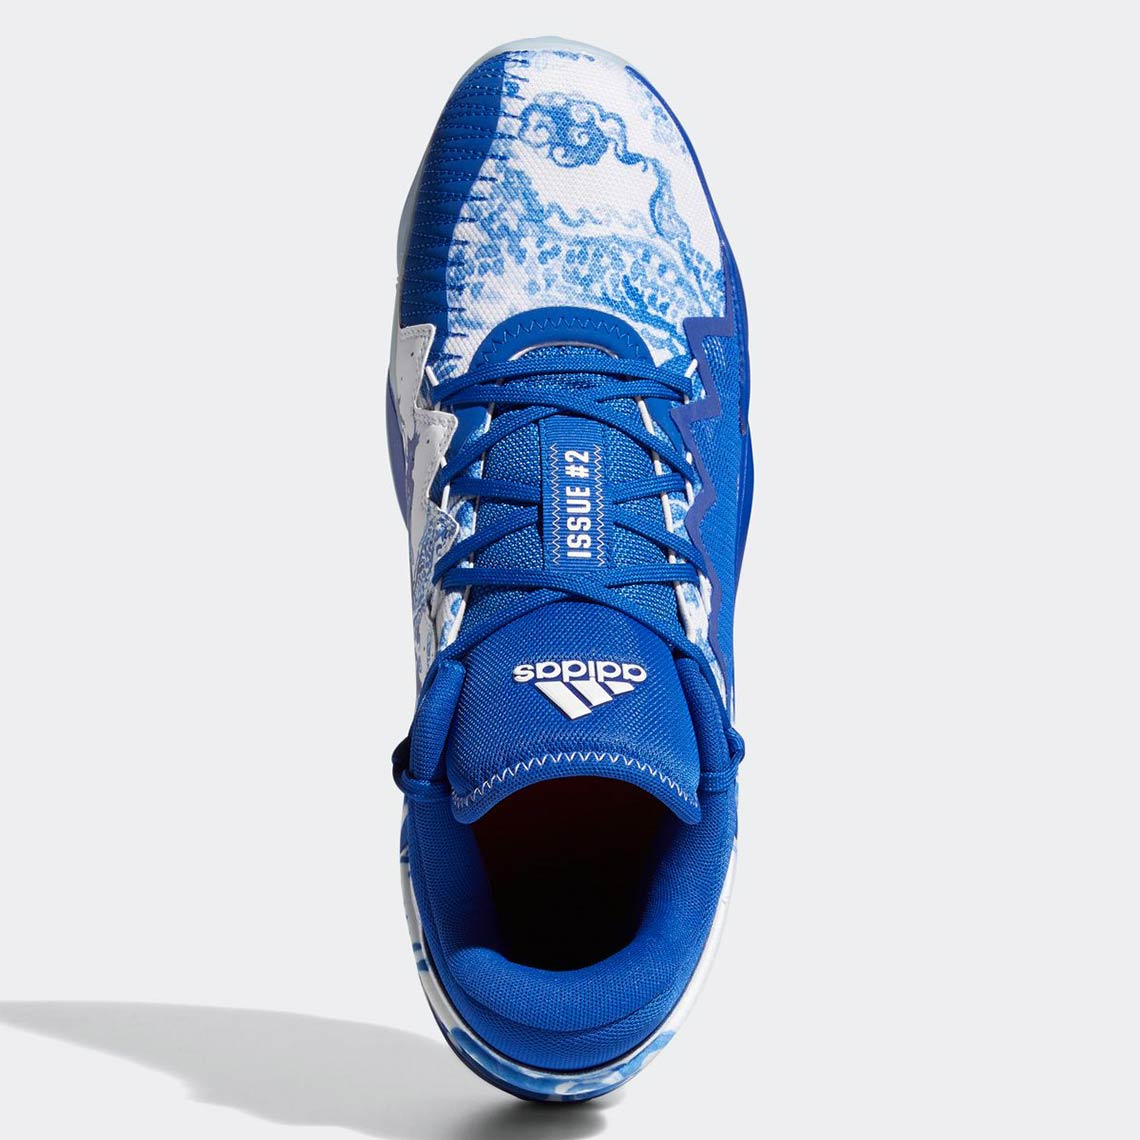 Adidas Don Issue 2 Royal Blue Fx7426 7